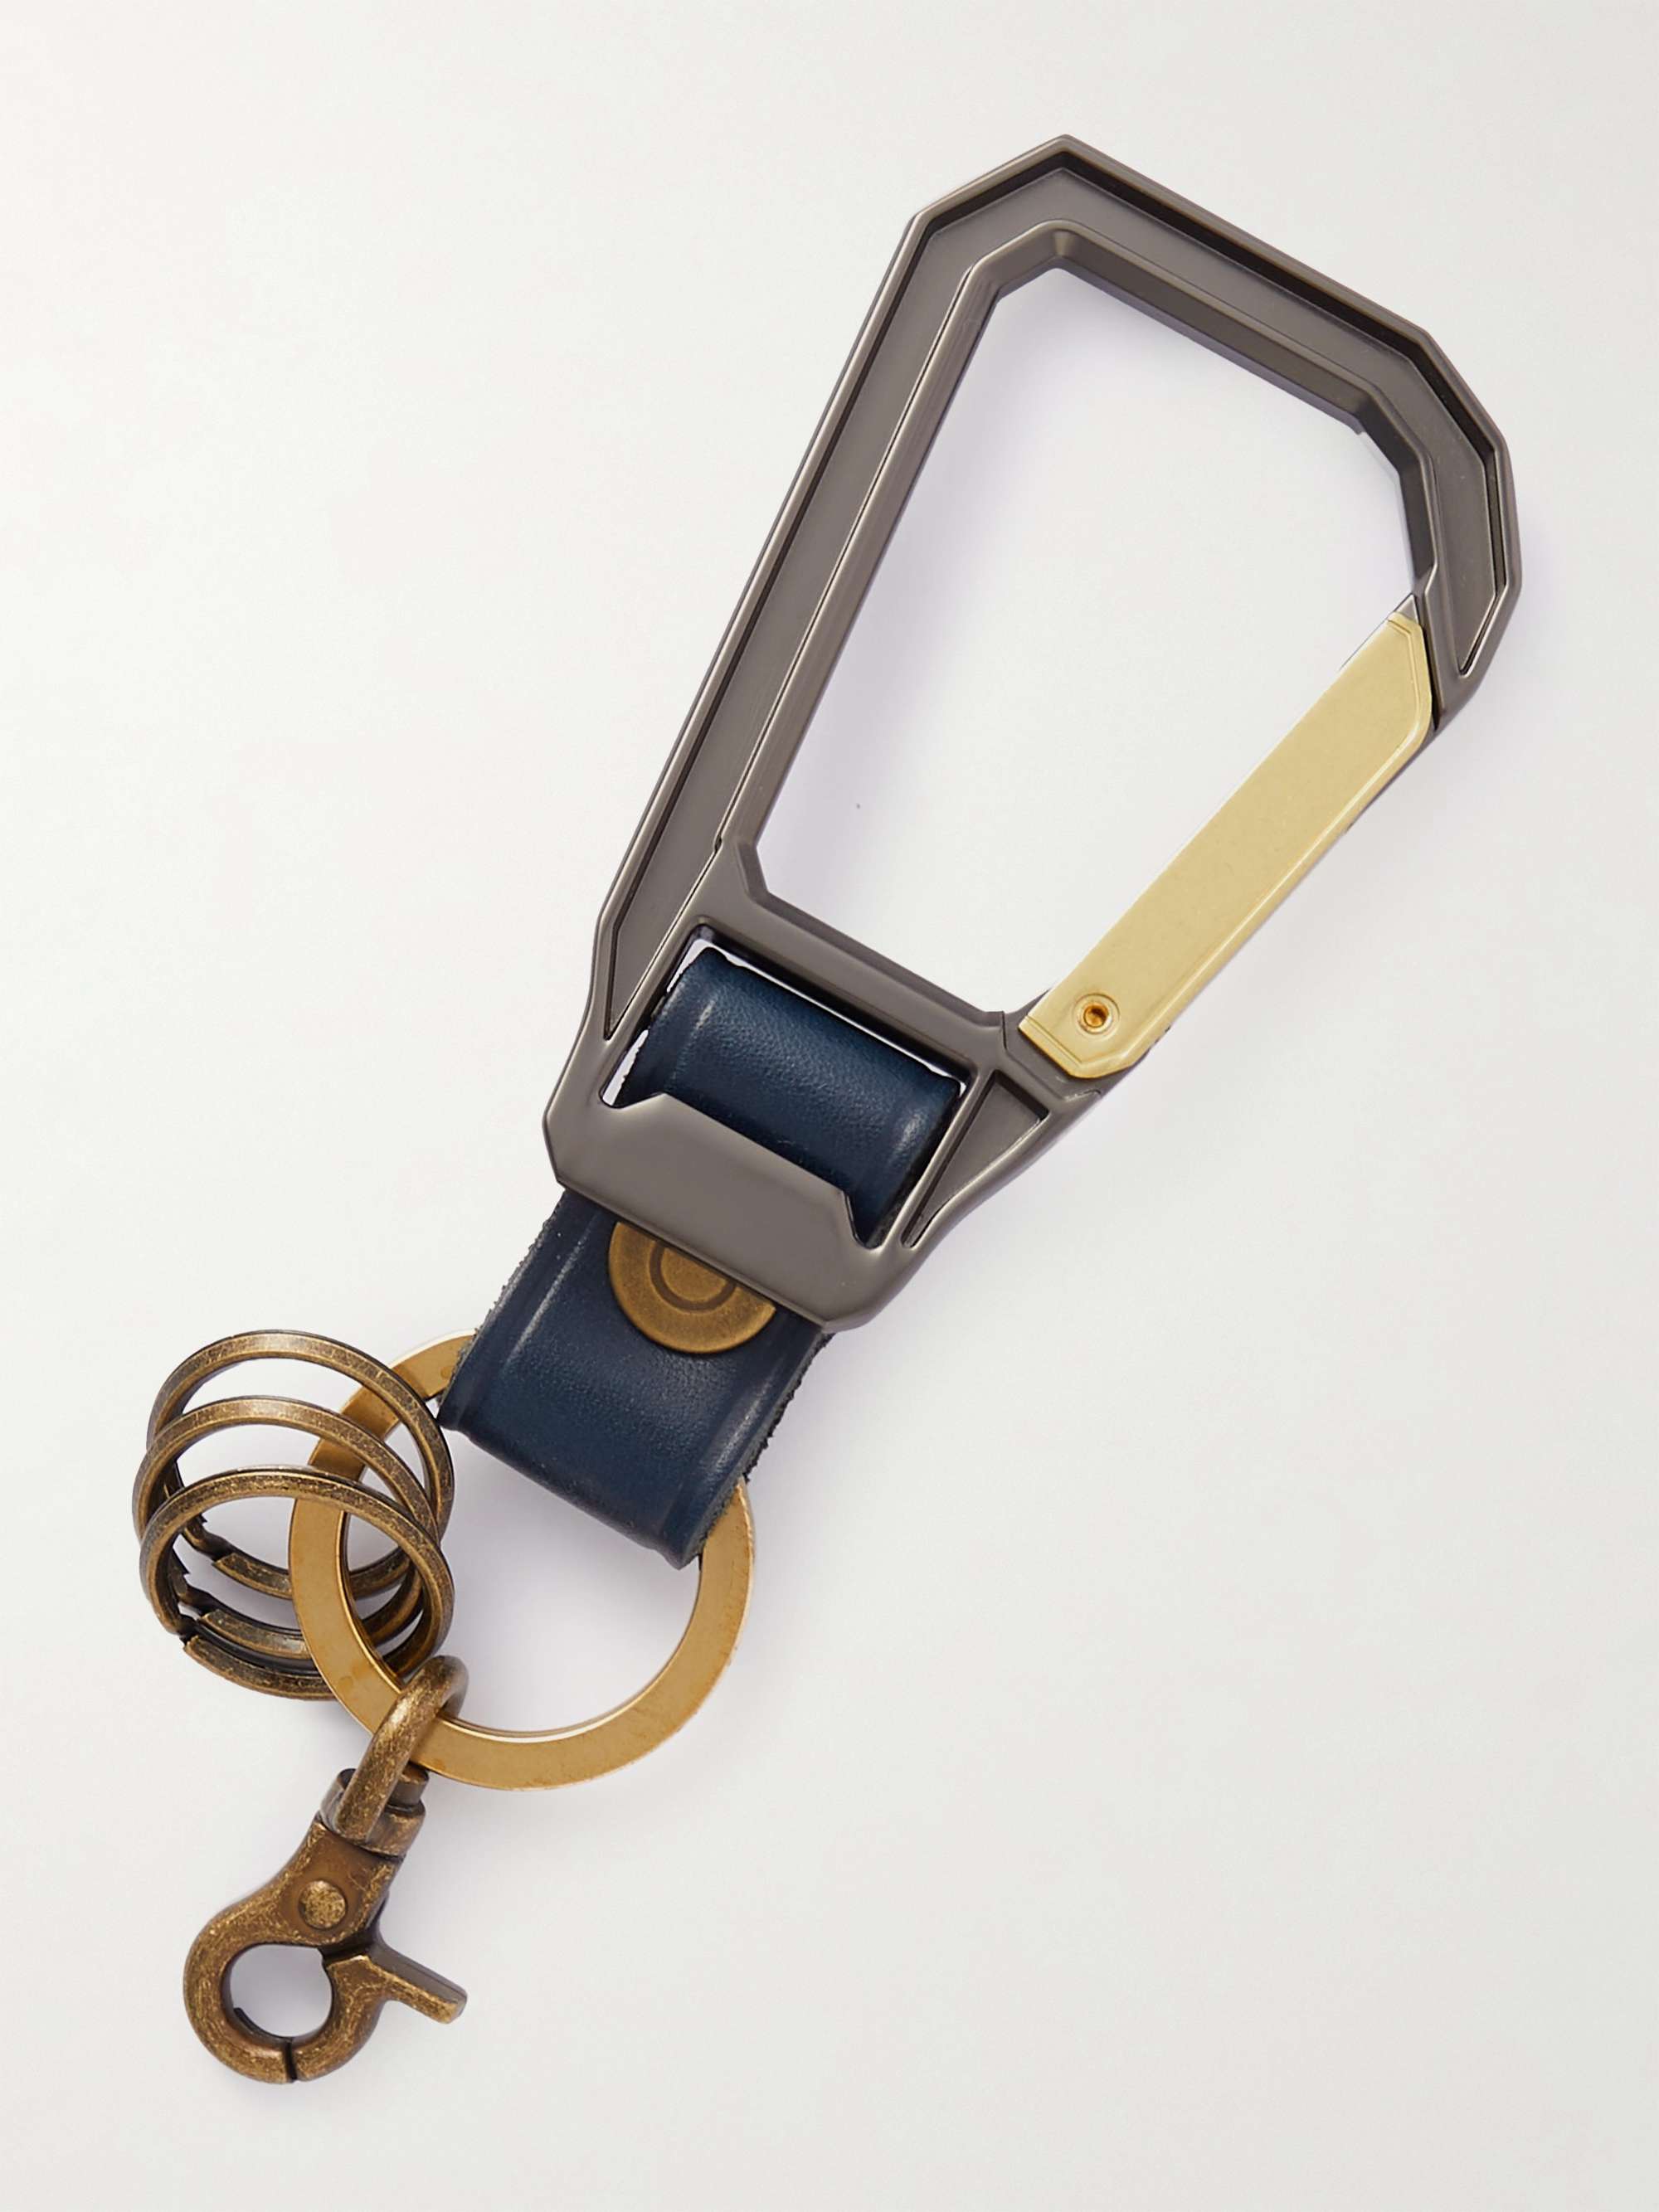 MASTER-PIECE Leather-Trimmed Gold and Silver-Tone Metal Key Ring